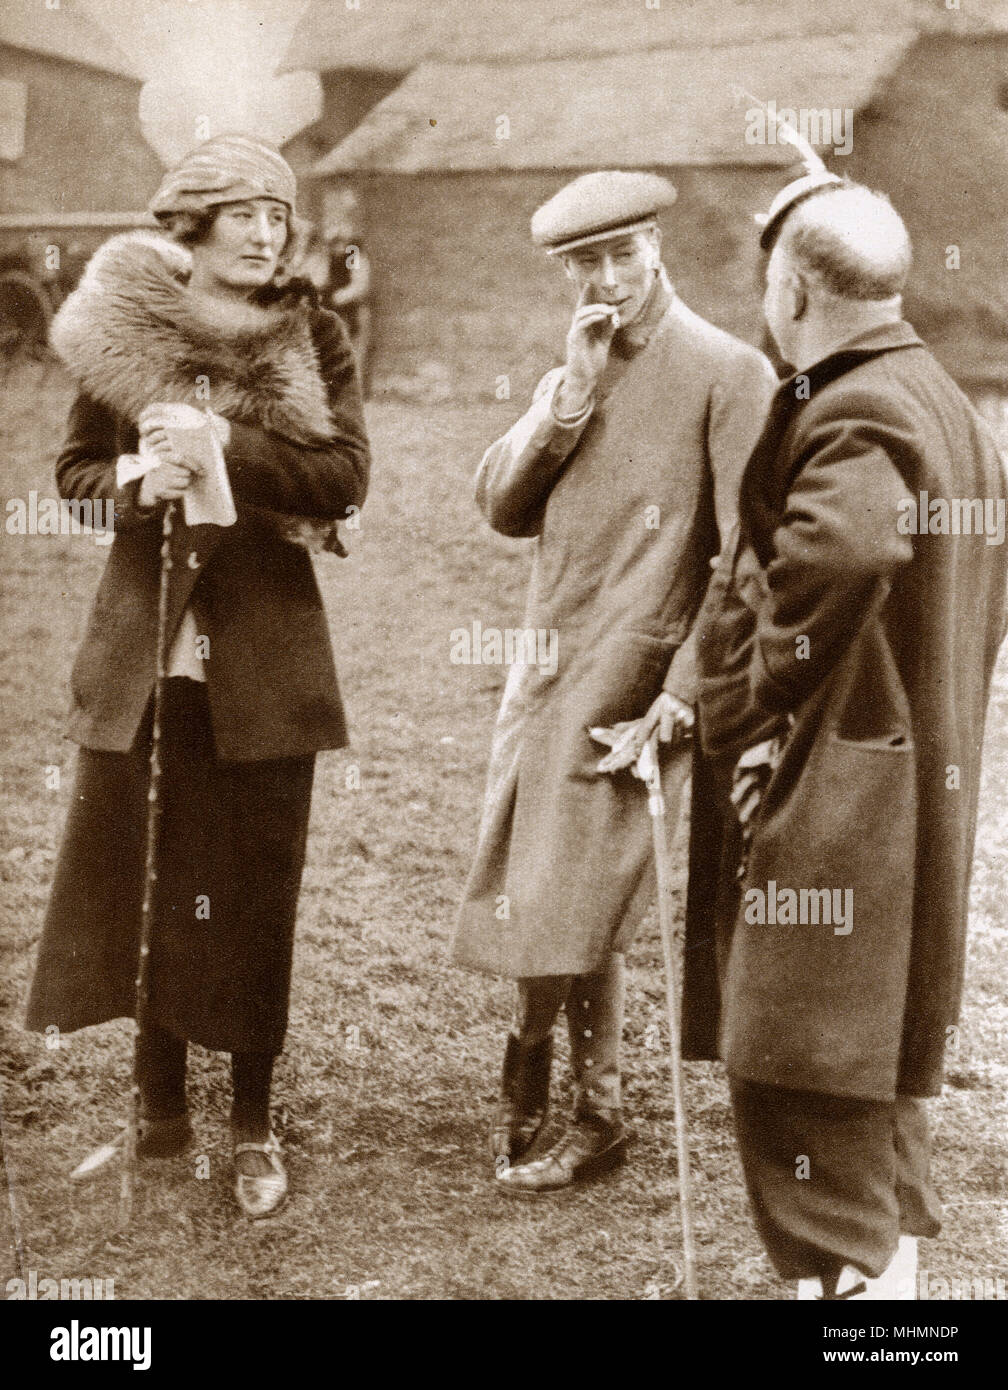 Prince Albert, Duke of York (future King George VI) (1895-1952) - having a  cigarette whilst sharing a bit of local gossip with 'Old Smiler' (a  character present at most hunt meetings) and